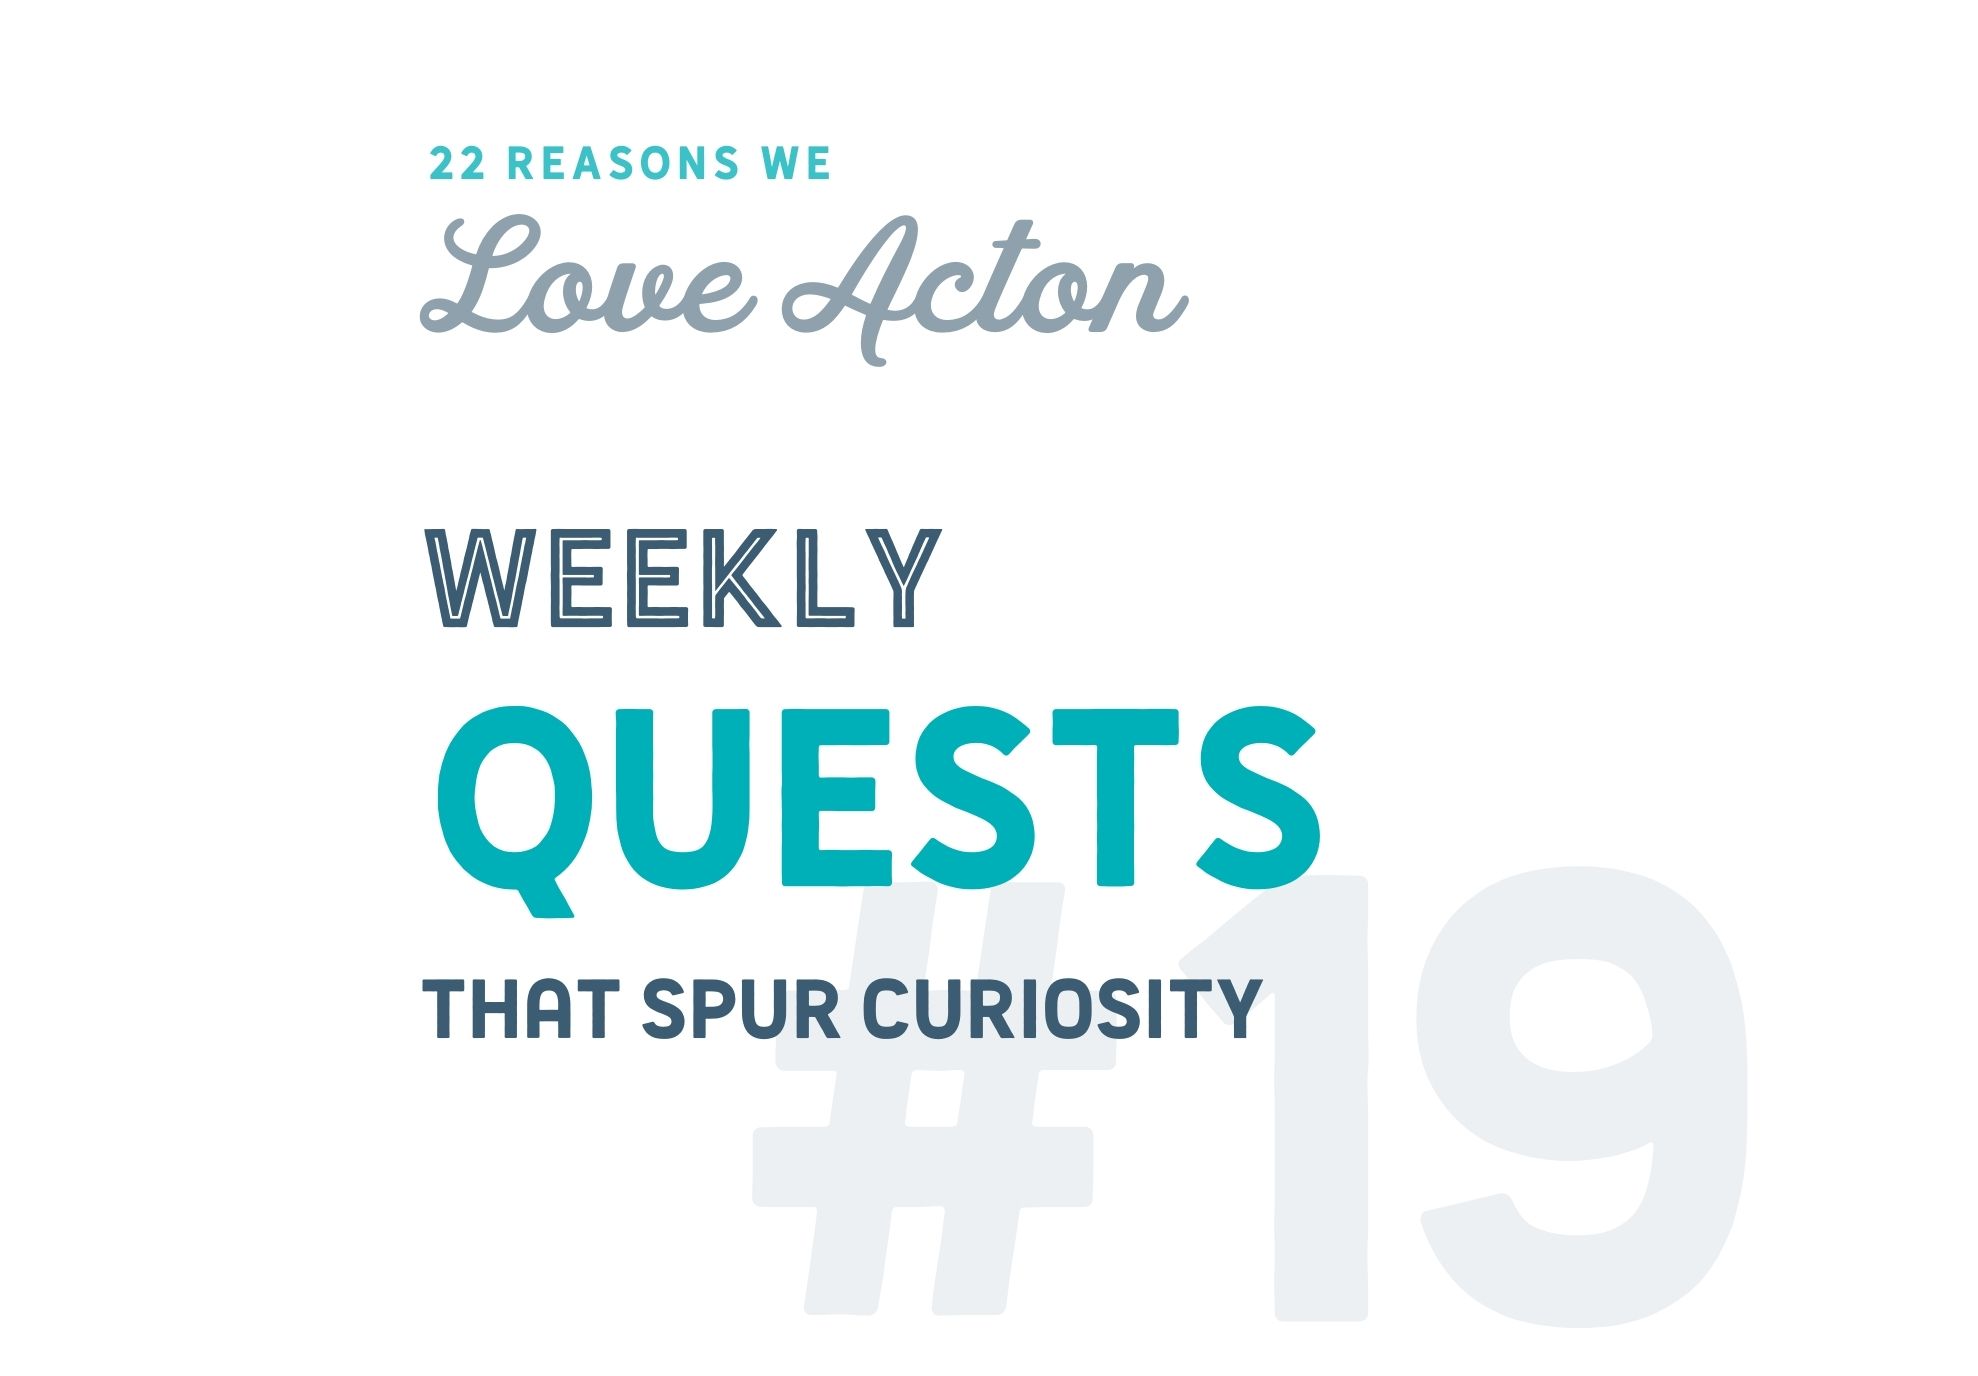 Weekly Quests that Spur Curiosity